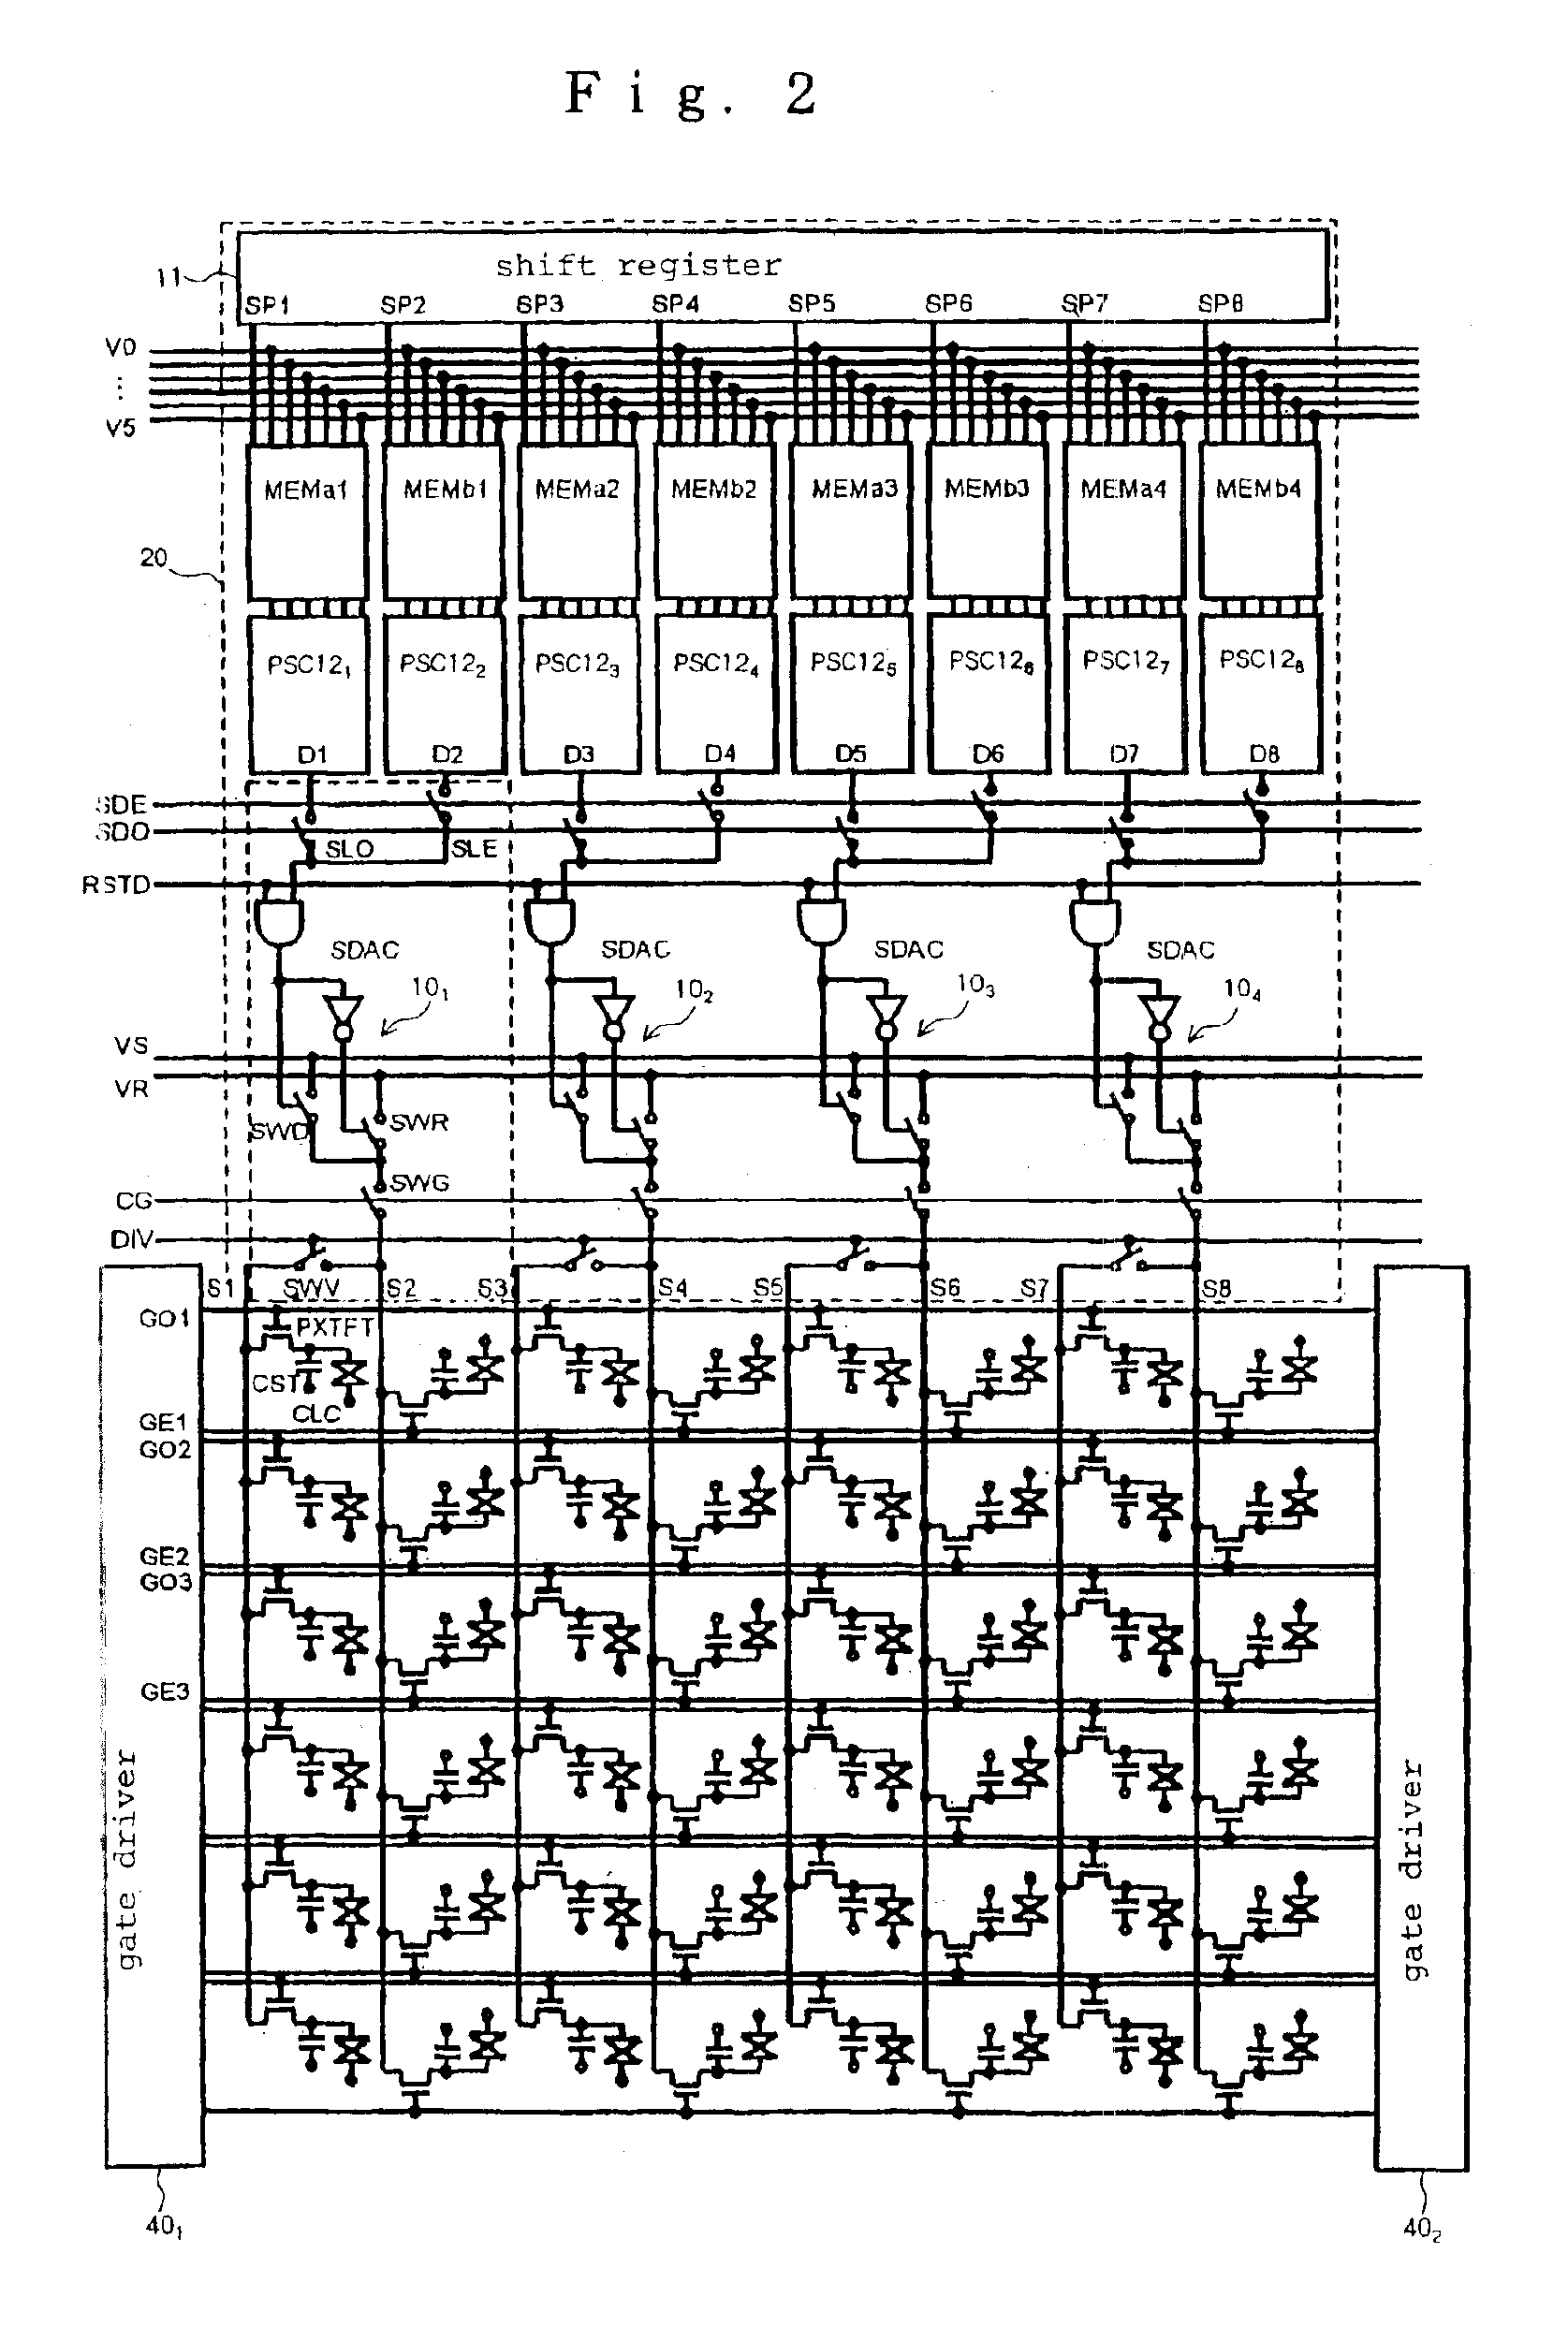 Display device for D/A conversion using load capacitances of two lines